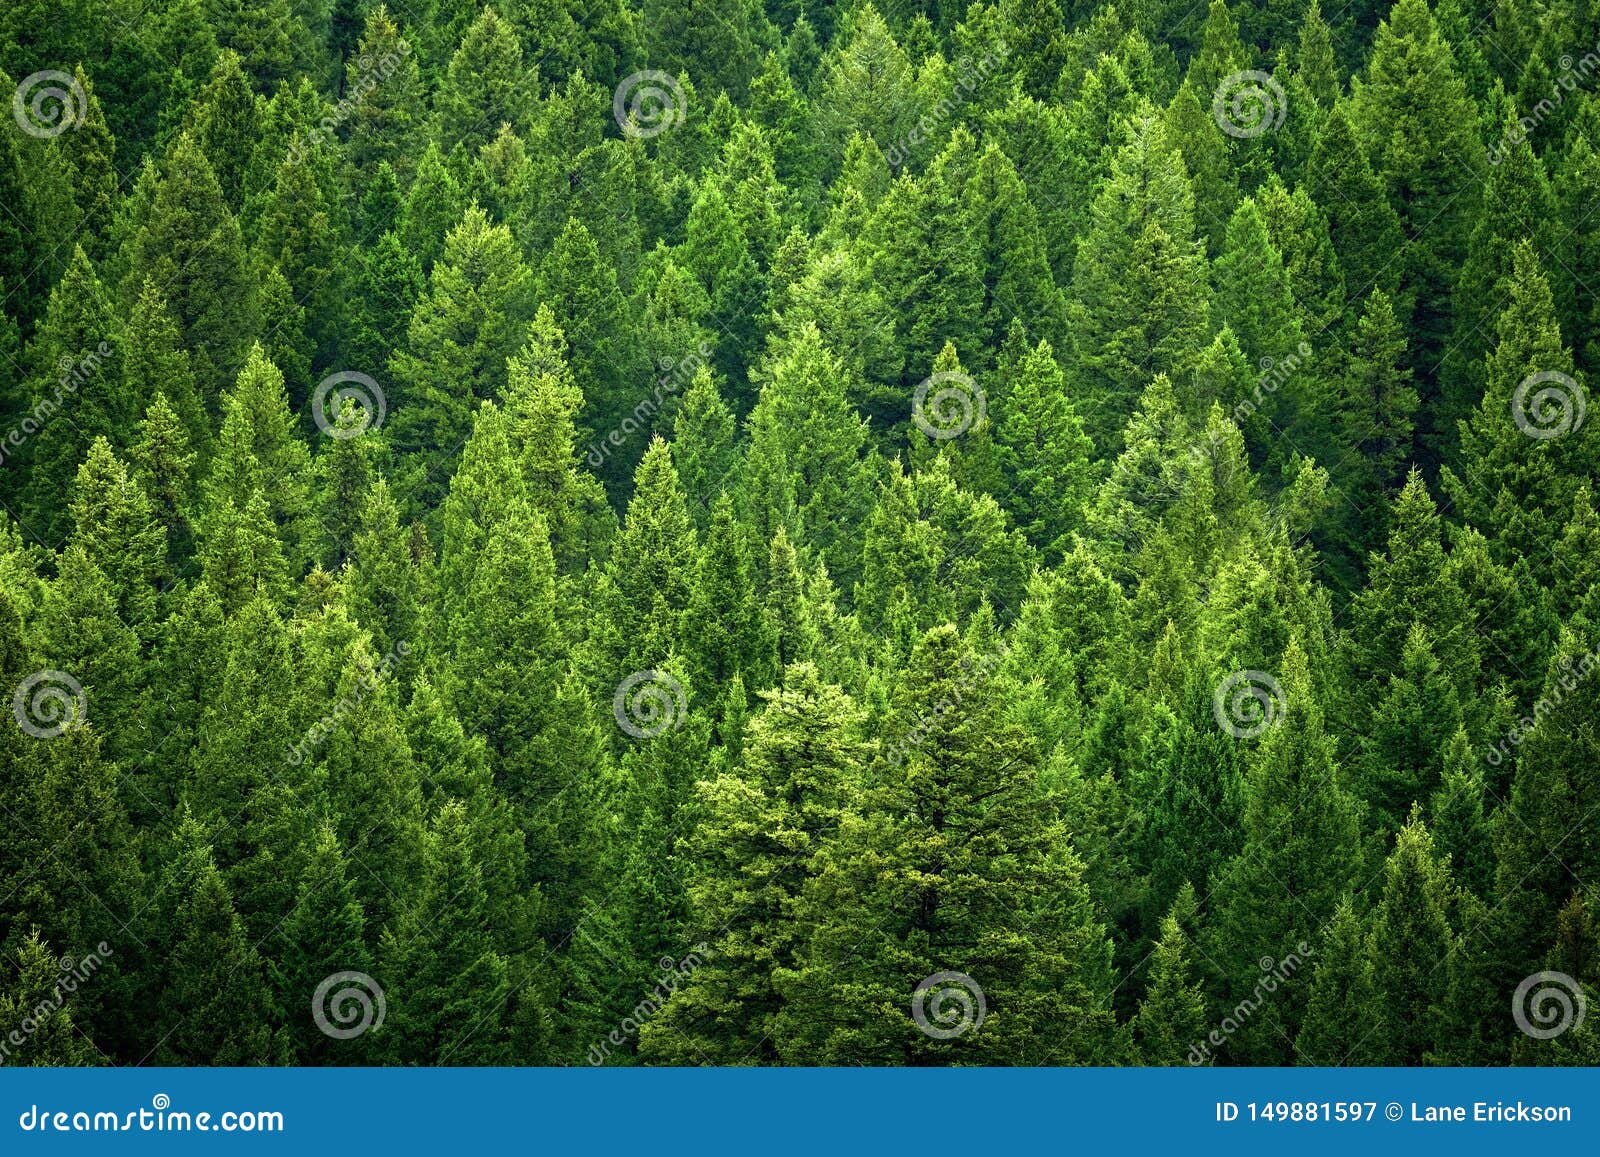 forest of pine trees in wilderness mountains rugged